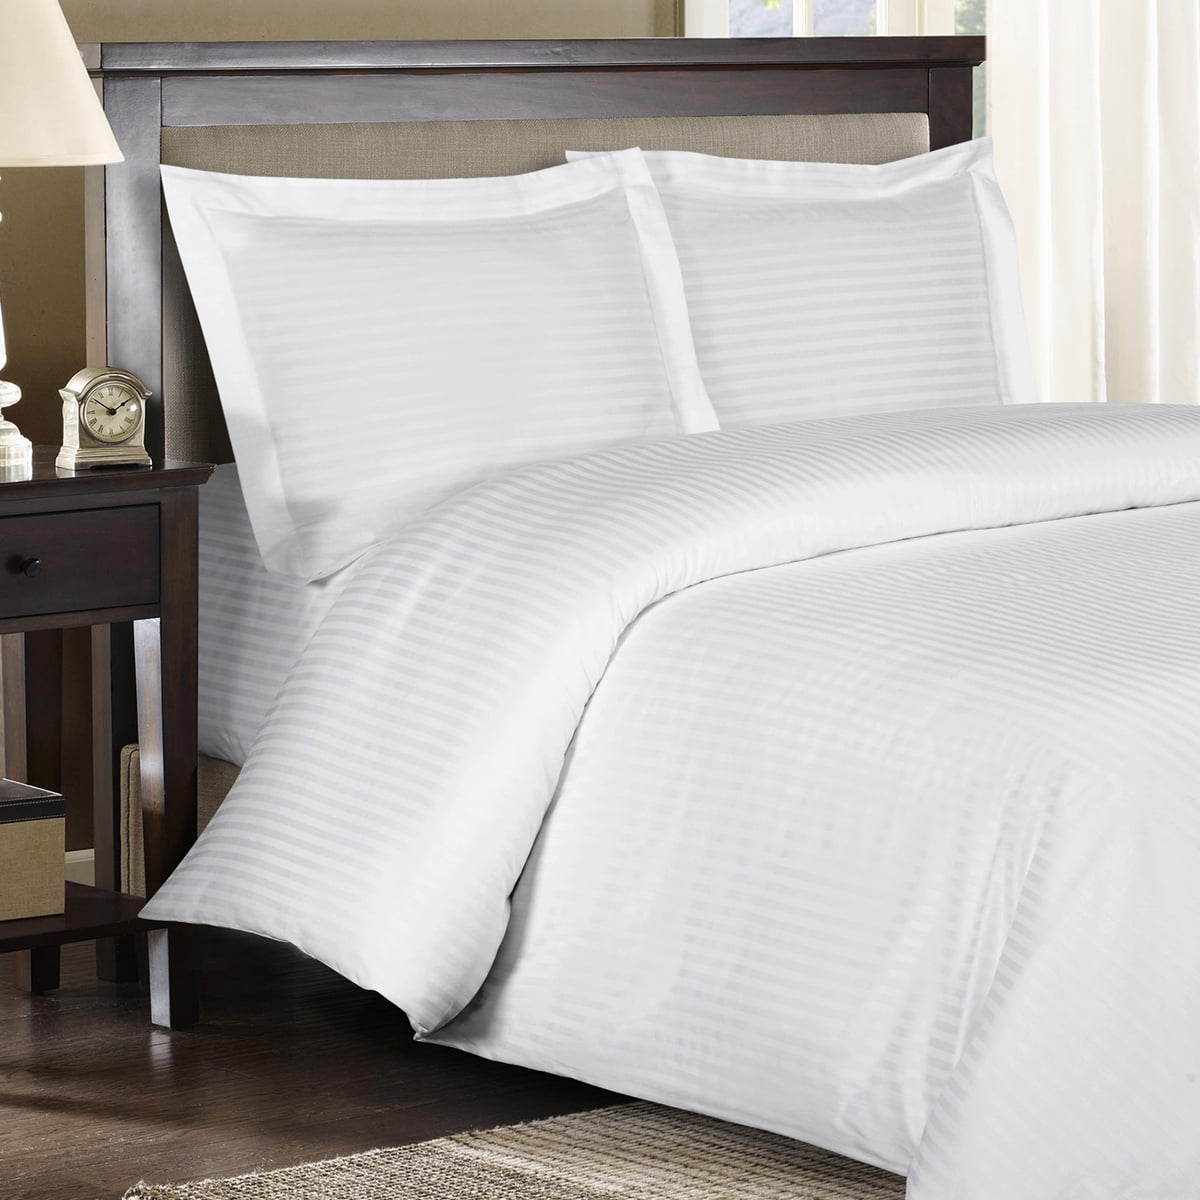 600 Thread Count Duvet Cover Set 100 Cotton Sateen Damask Striped Full/Queen White